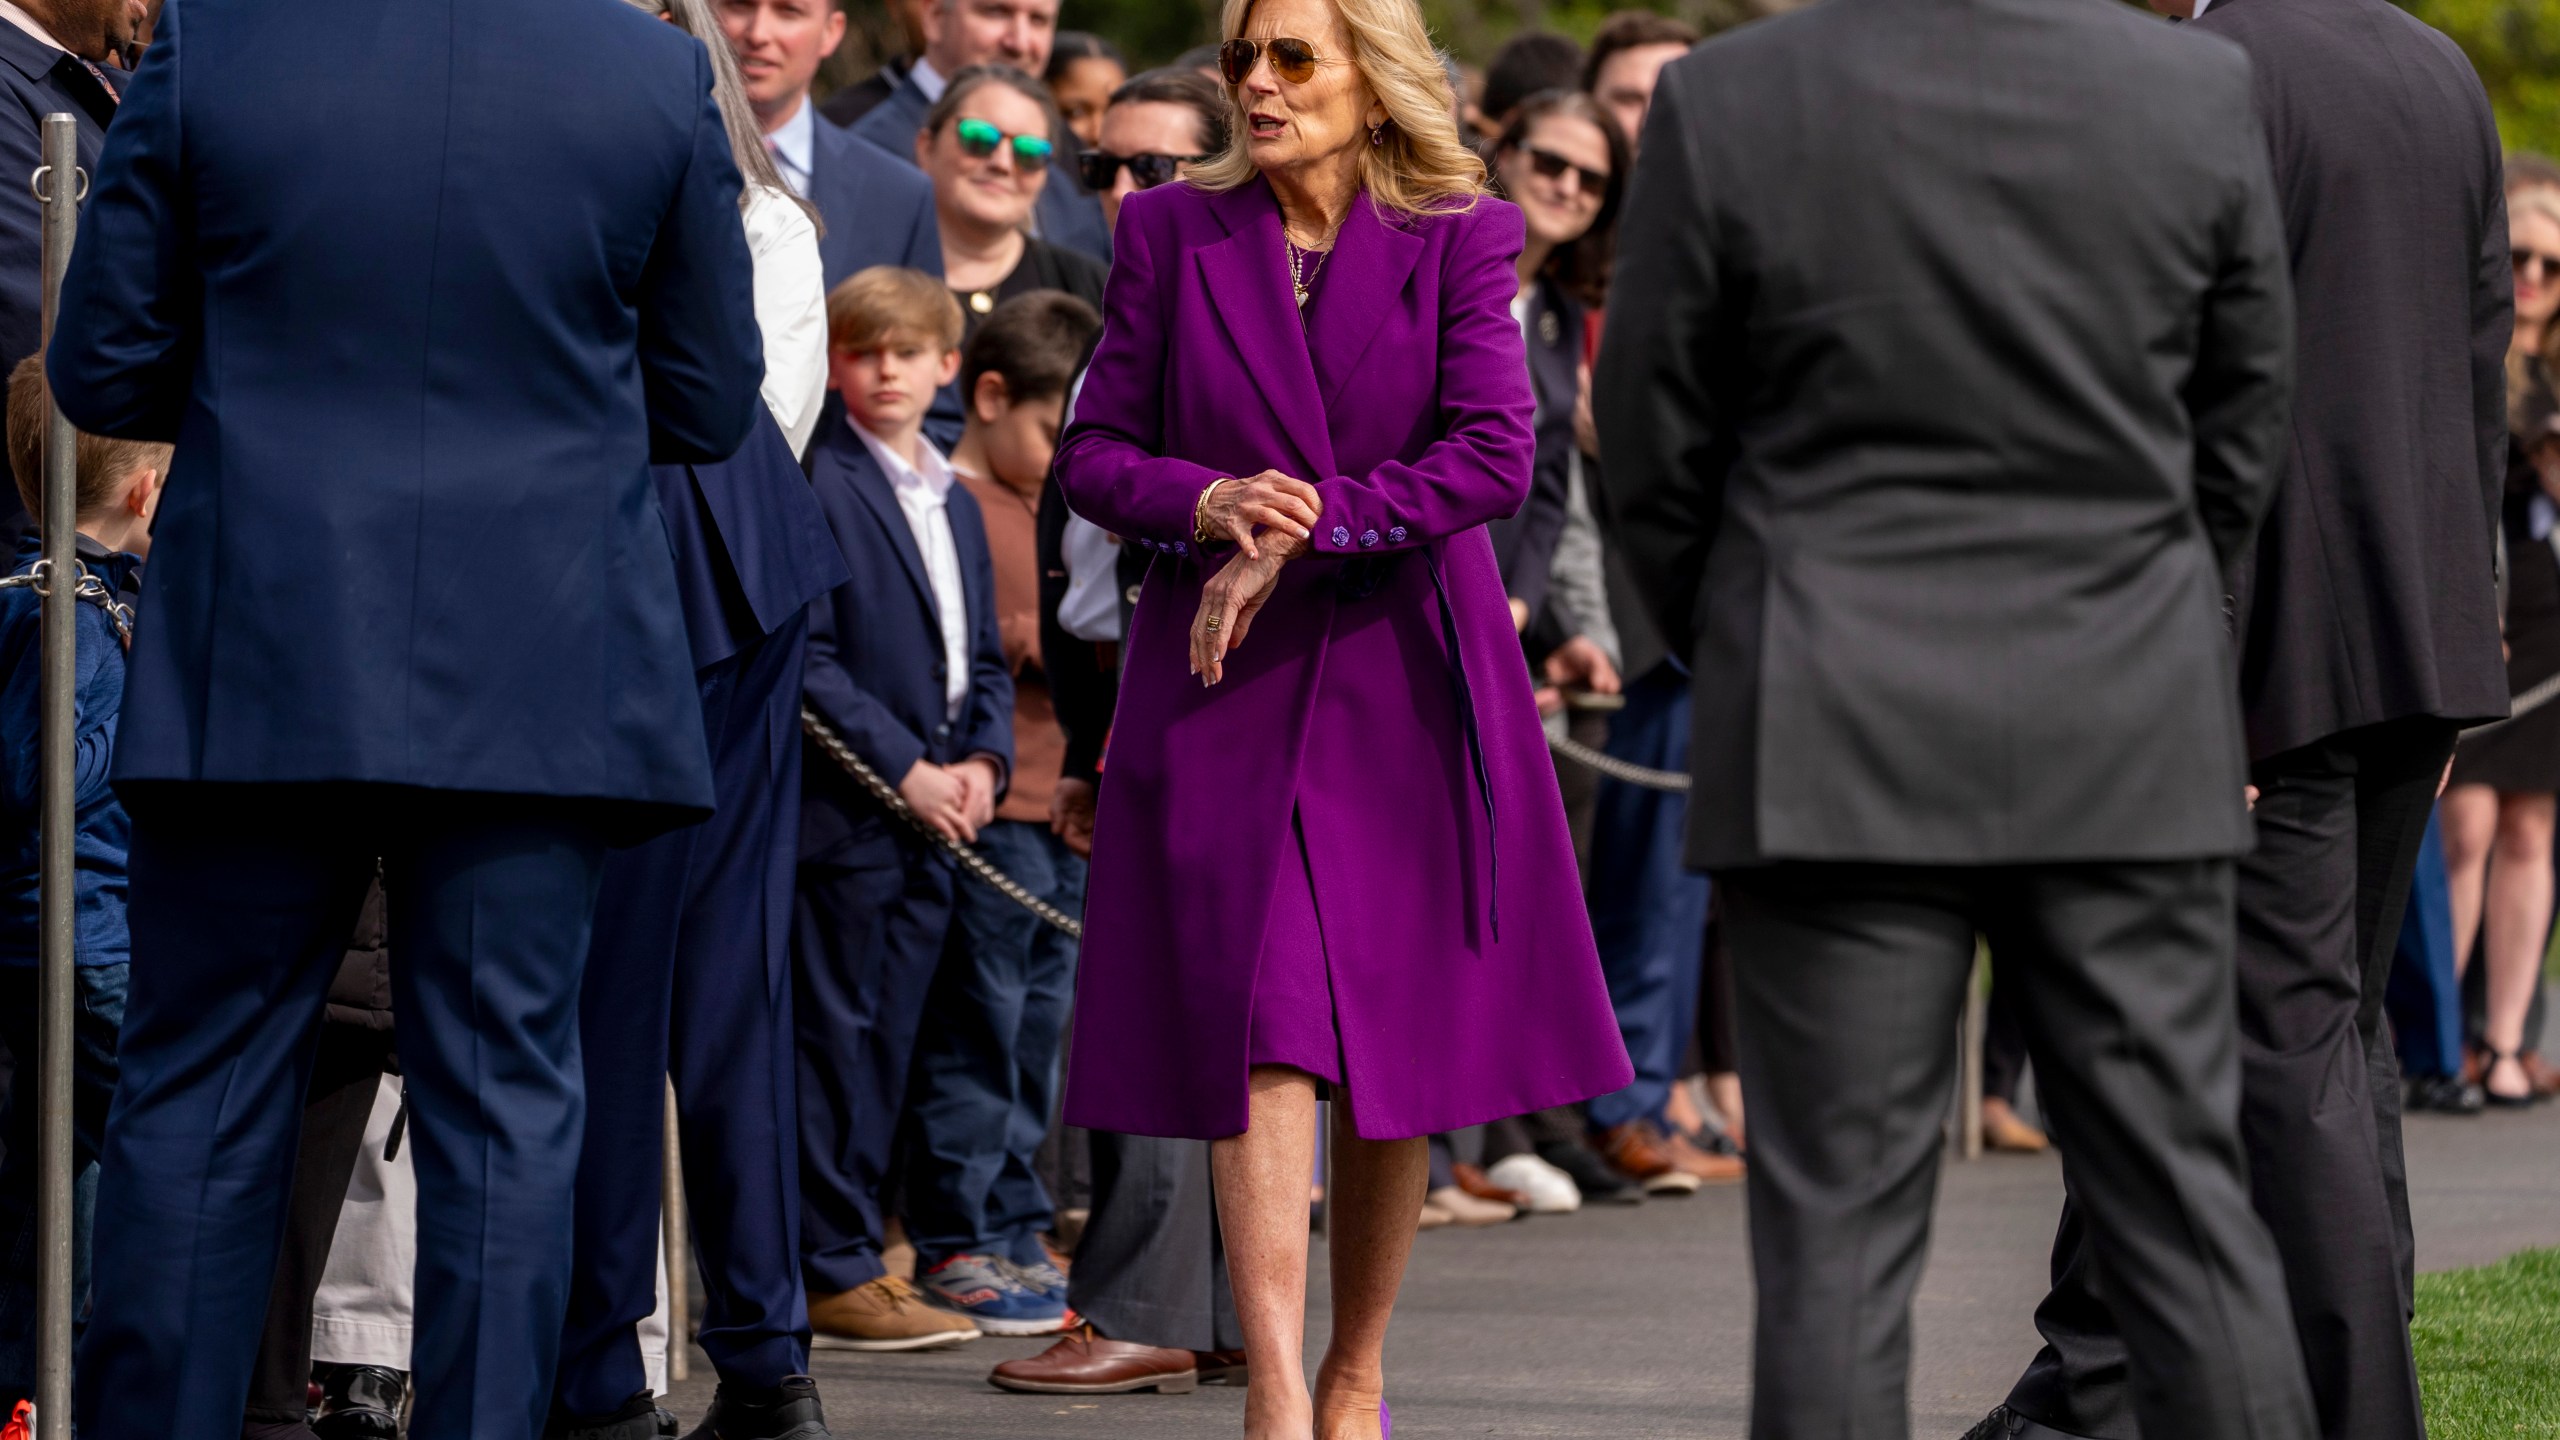 First lady Jill Biden checks her watch as President Joe Biden, not pictured, greets guests on the South Lawn before boarding Marine One at the White House in Washington, Friday, March 8, 2024, for a short trip to Andrews Air Force Base, Md., and then on to Philadelphia for a campaign event. (AP Photo/Andrew Harnik)